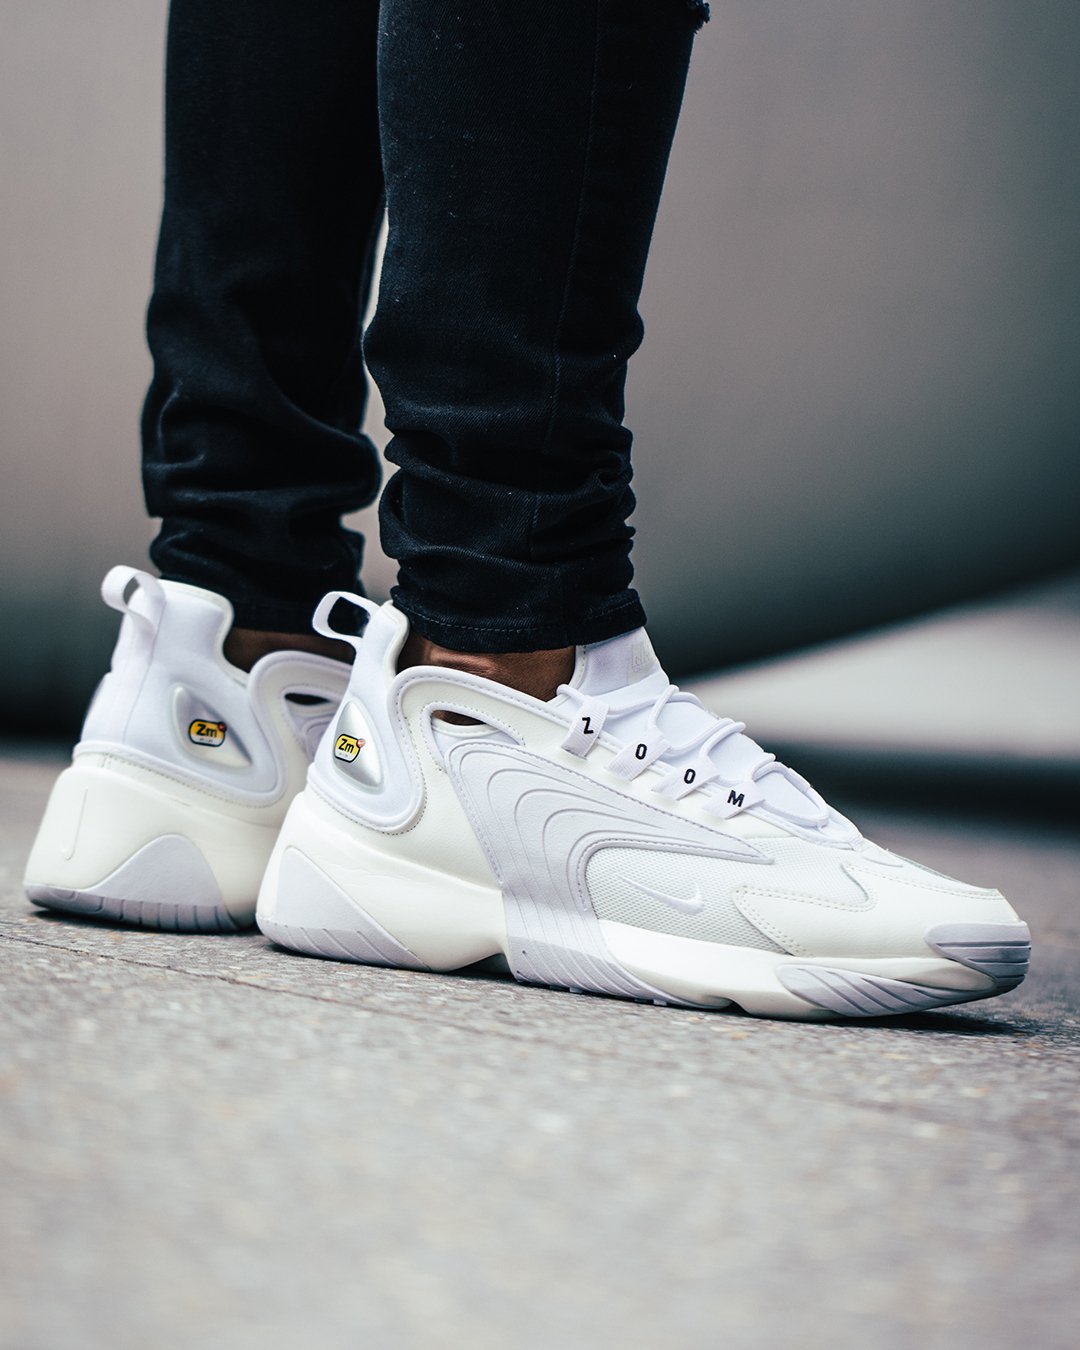 Præstation Afhængig Begivenhed Culture Kings on Twitter: "Oooo..! Nike Air Zoom 2k Off White colourway  takes inspiration from Nike's back in the early 90's, now fused with modern  zoom technology. #culturekings #nikeairzoom #zoom2k #onfeet #sneakernews #